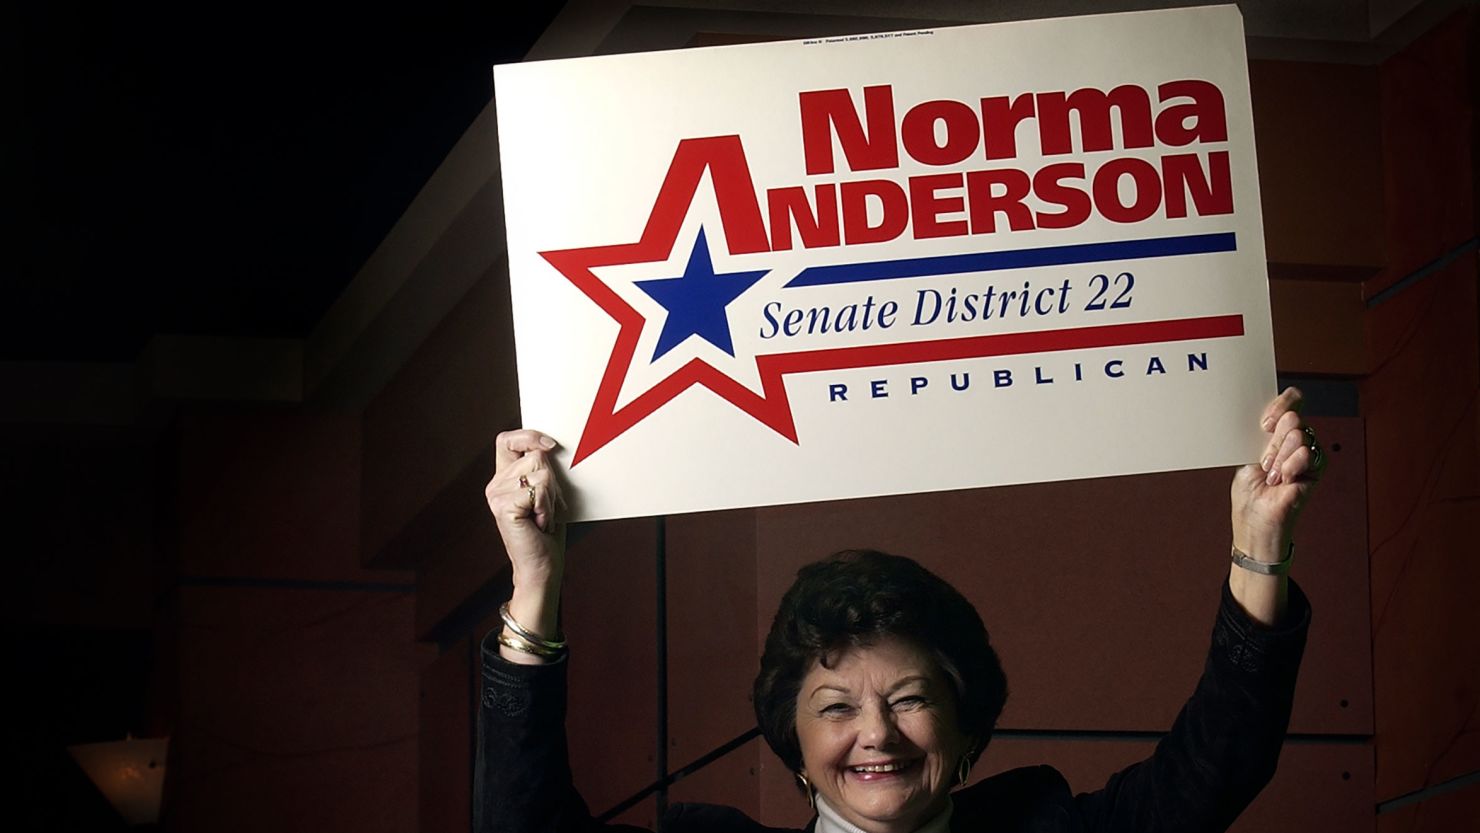 Sen. Norma Anderson poses for a portrait with campaign memorabilia from her 2002 election.